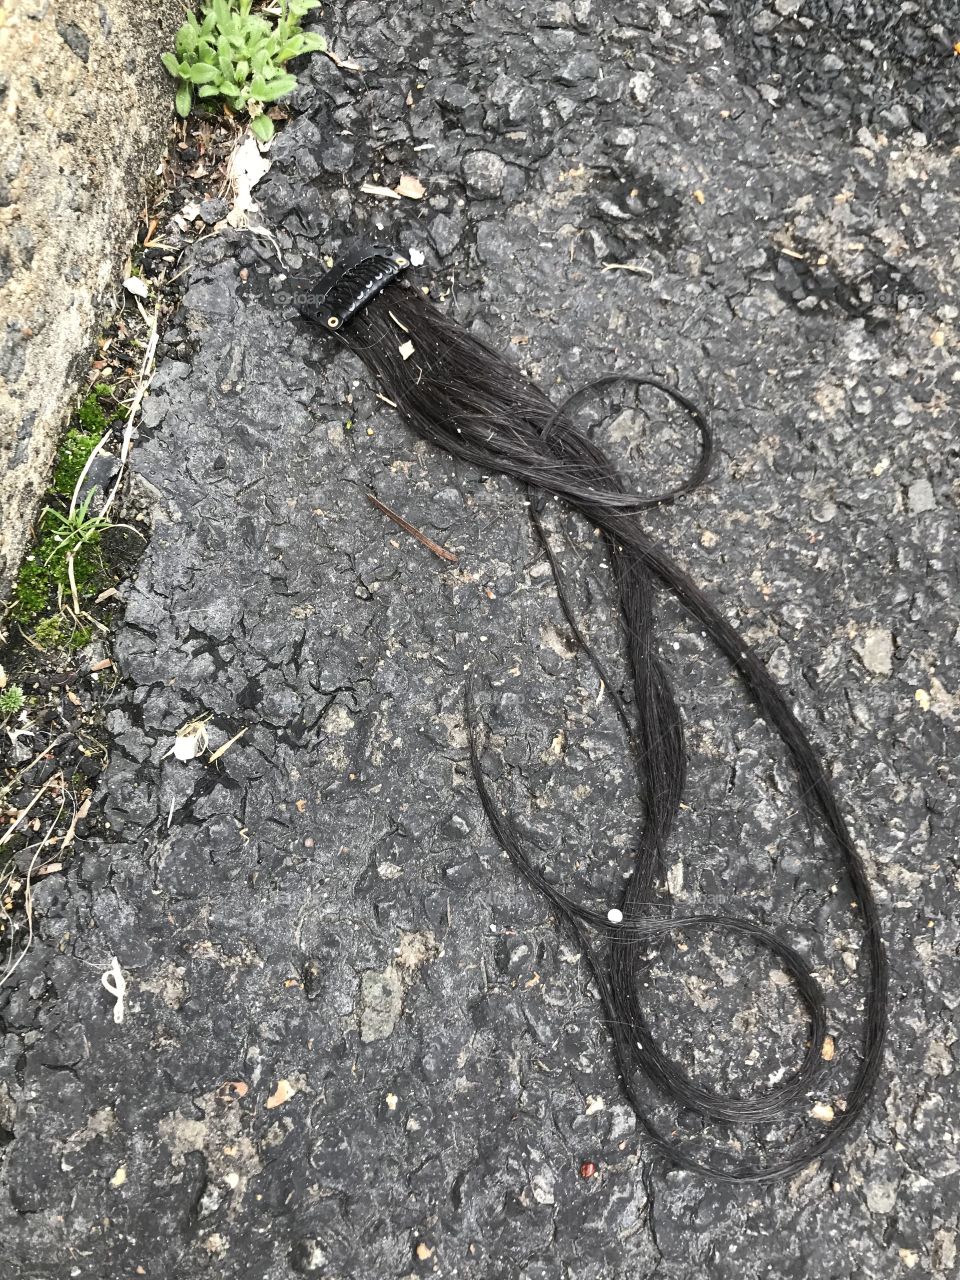 A nasty old hair extension on the ground